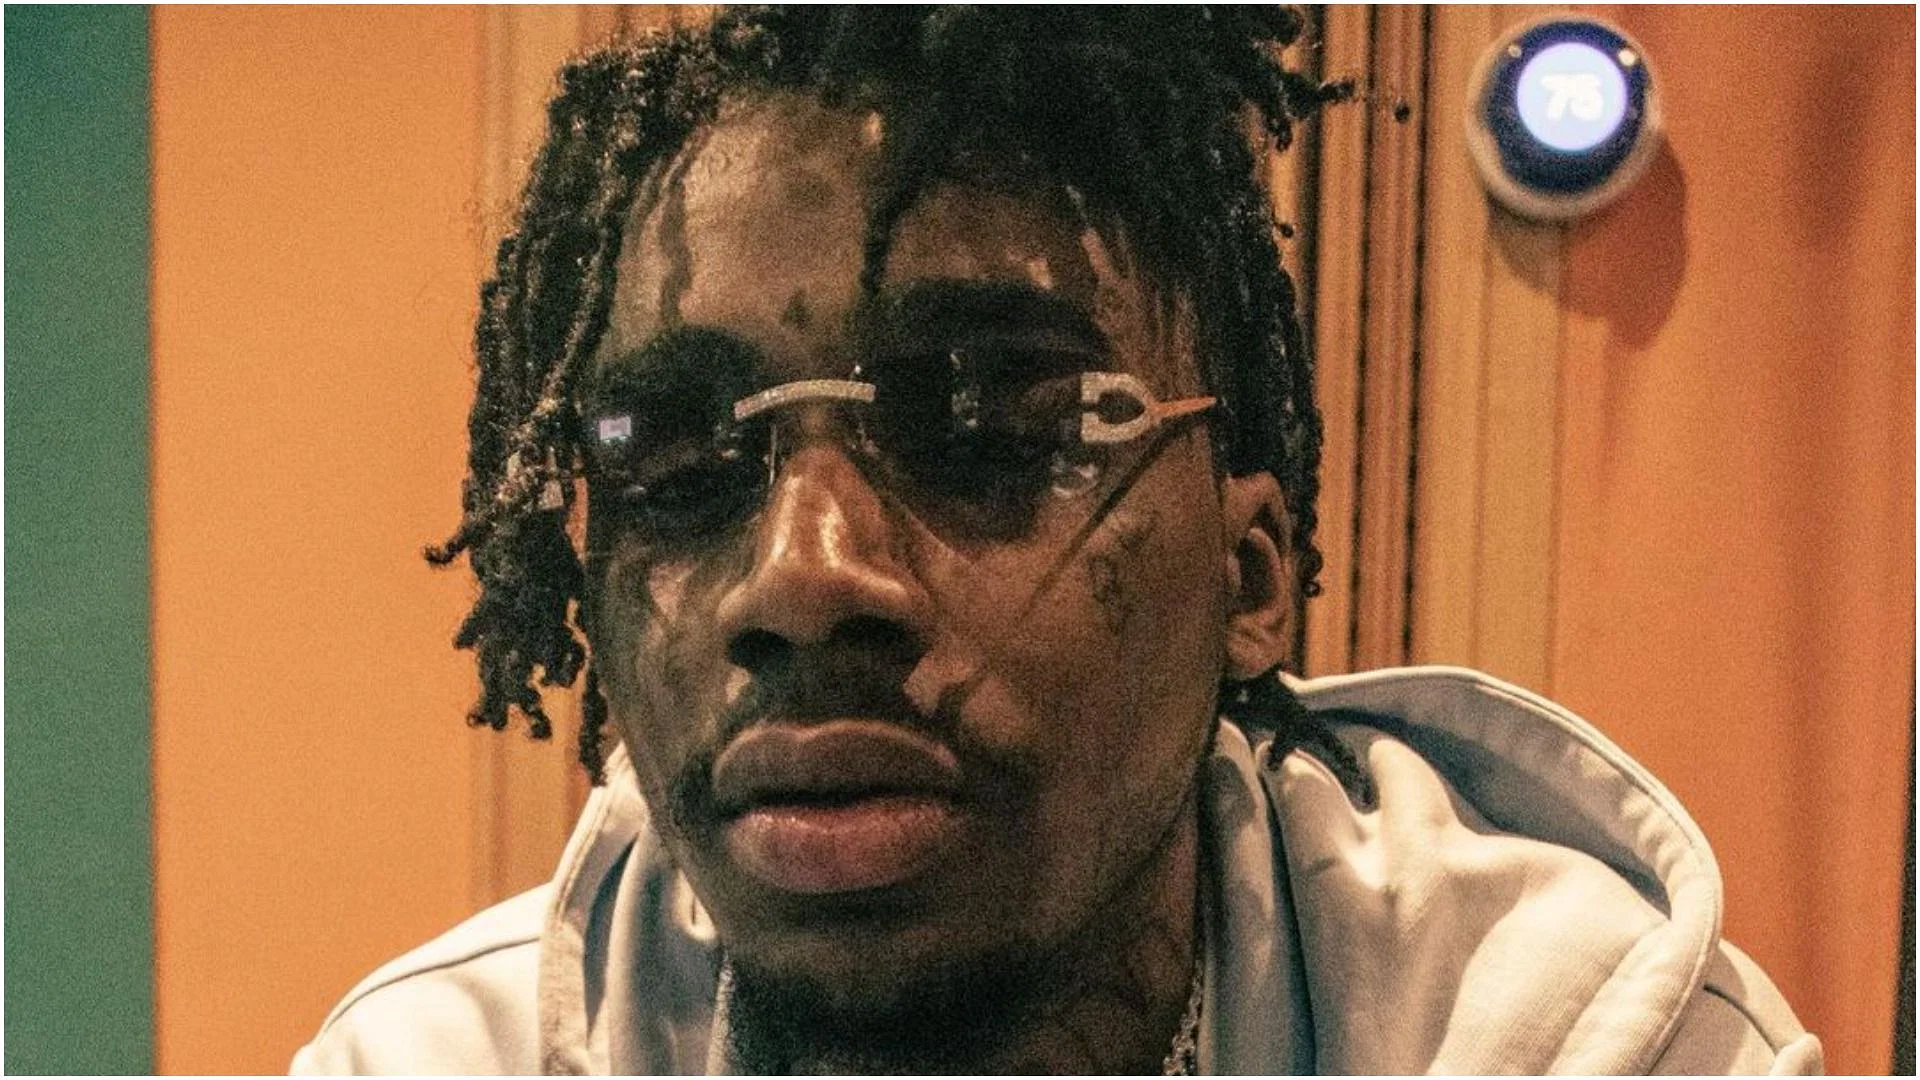 RAPPER GOONEW DEAD BODY PICS, Bliss Nightclub Apologies Later Display Video Of A Rapper On Stage Viral!